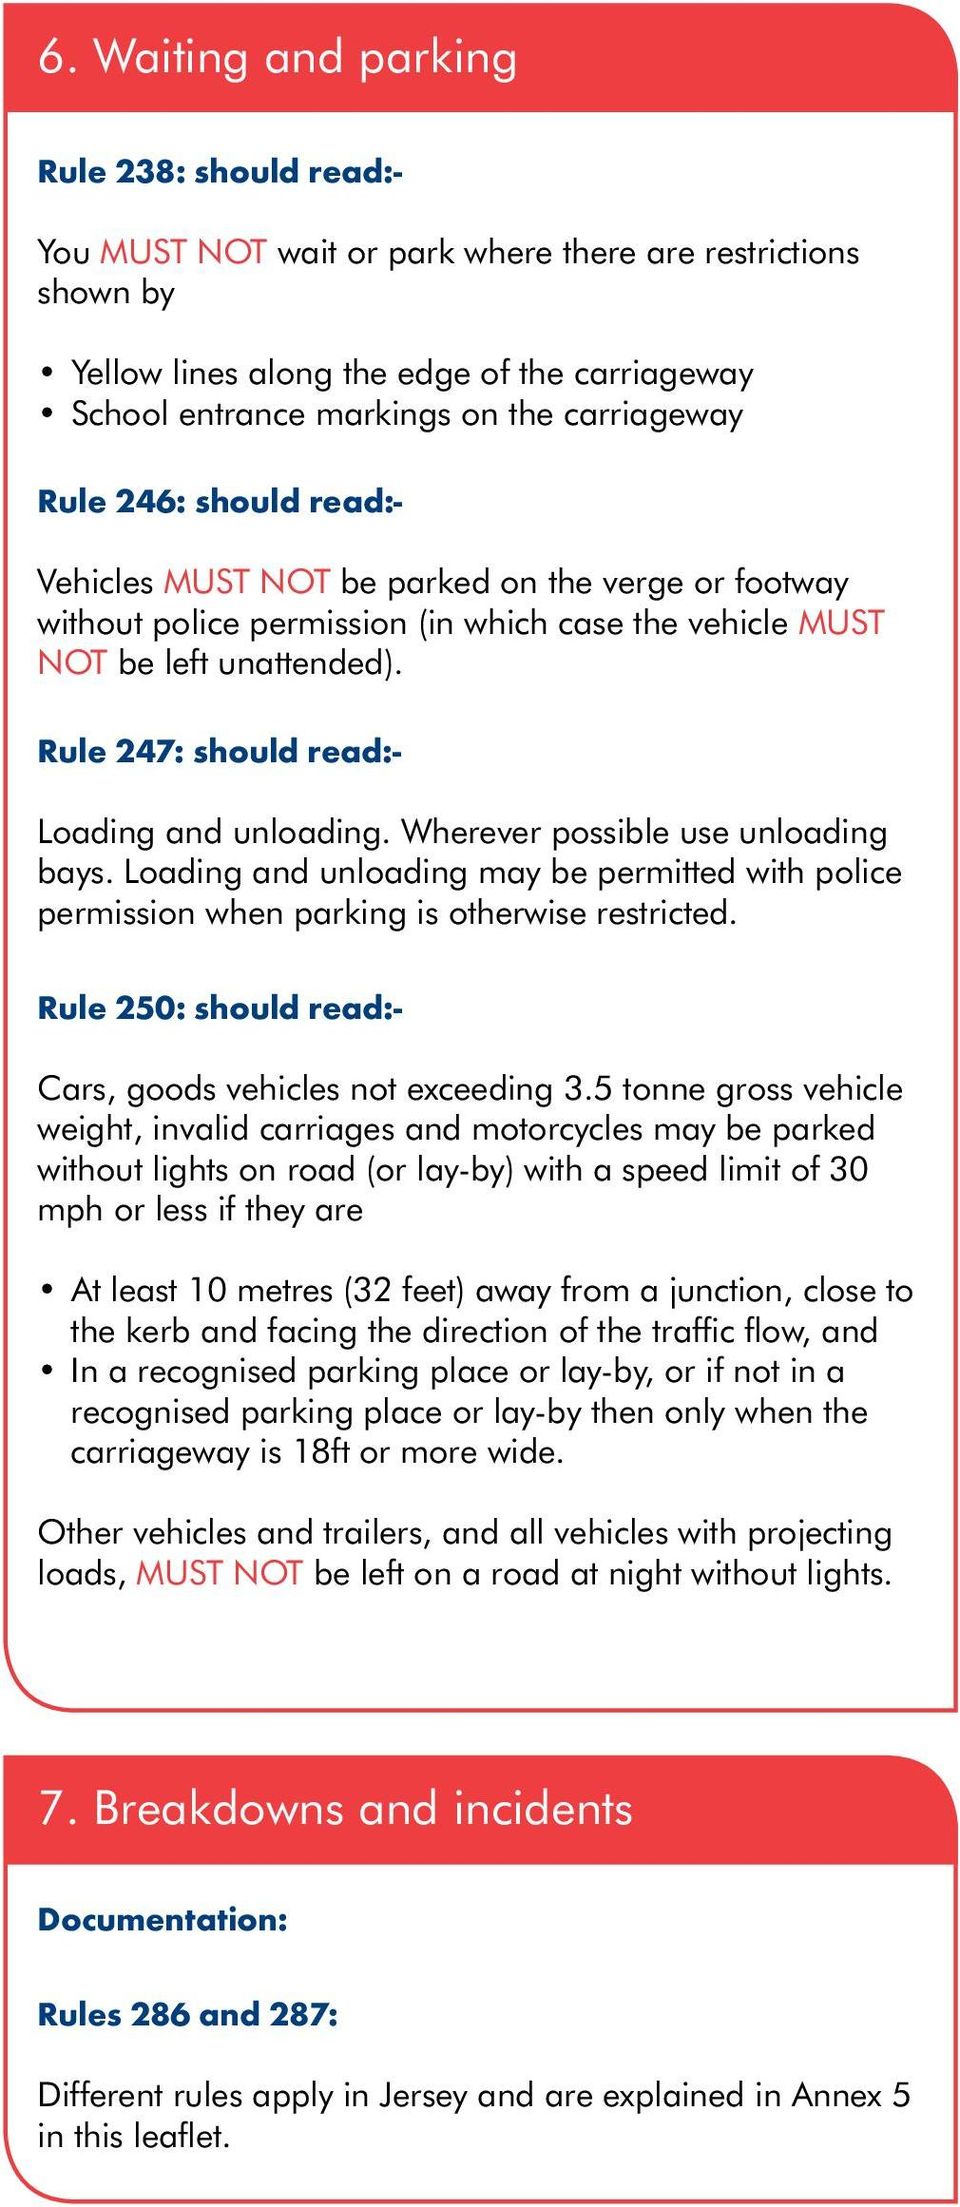 Rule 247: should read: Loading and unloading. Wherever possible use unloading bays. Loading and unloading may be permitted with police permission when parking is otherwise restricted.